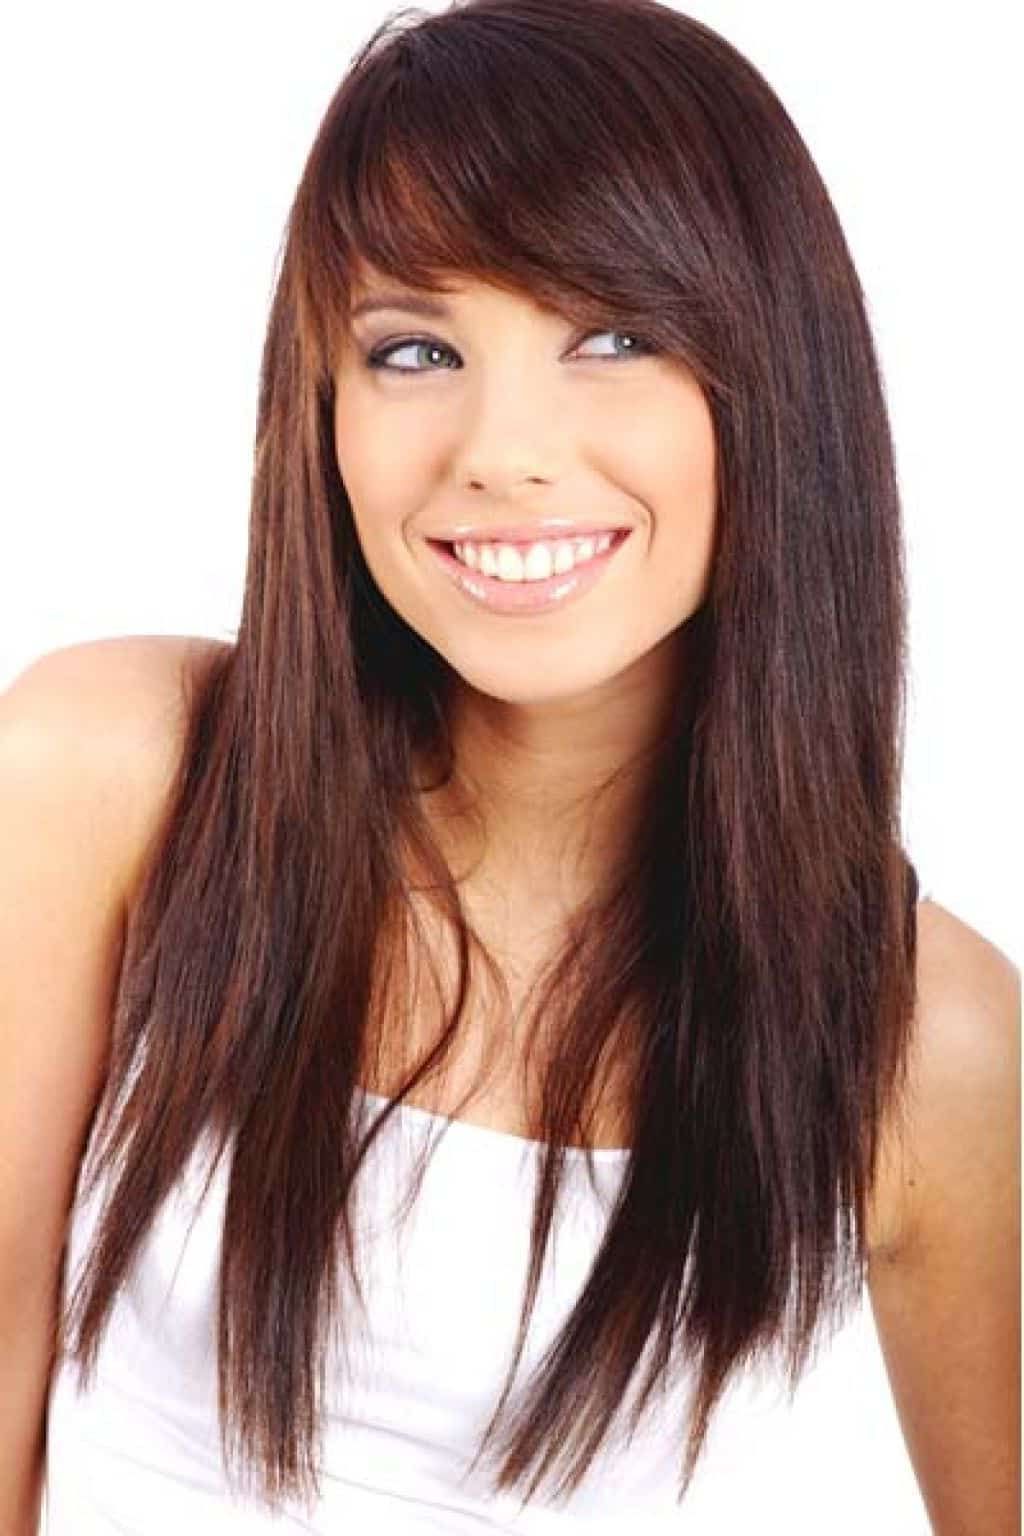 10 Alluring Side Bangs On Long Hair 2018 – Hairstylecamp Throughout Short Haircuts With Long Side Bangs (View 1 of 25)